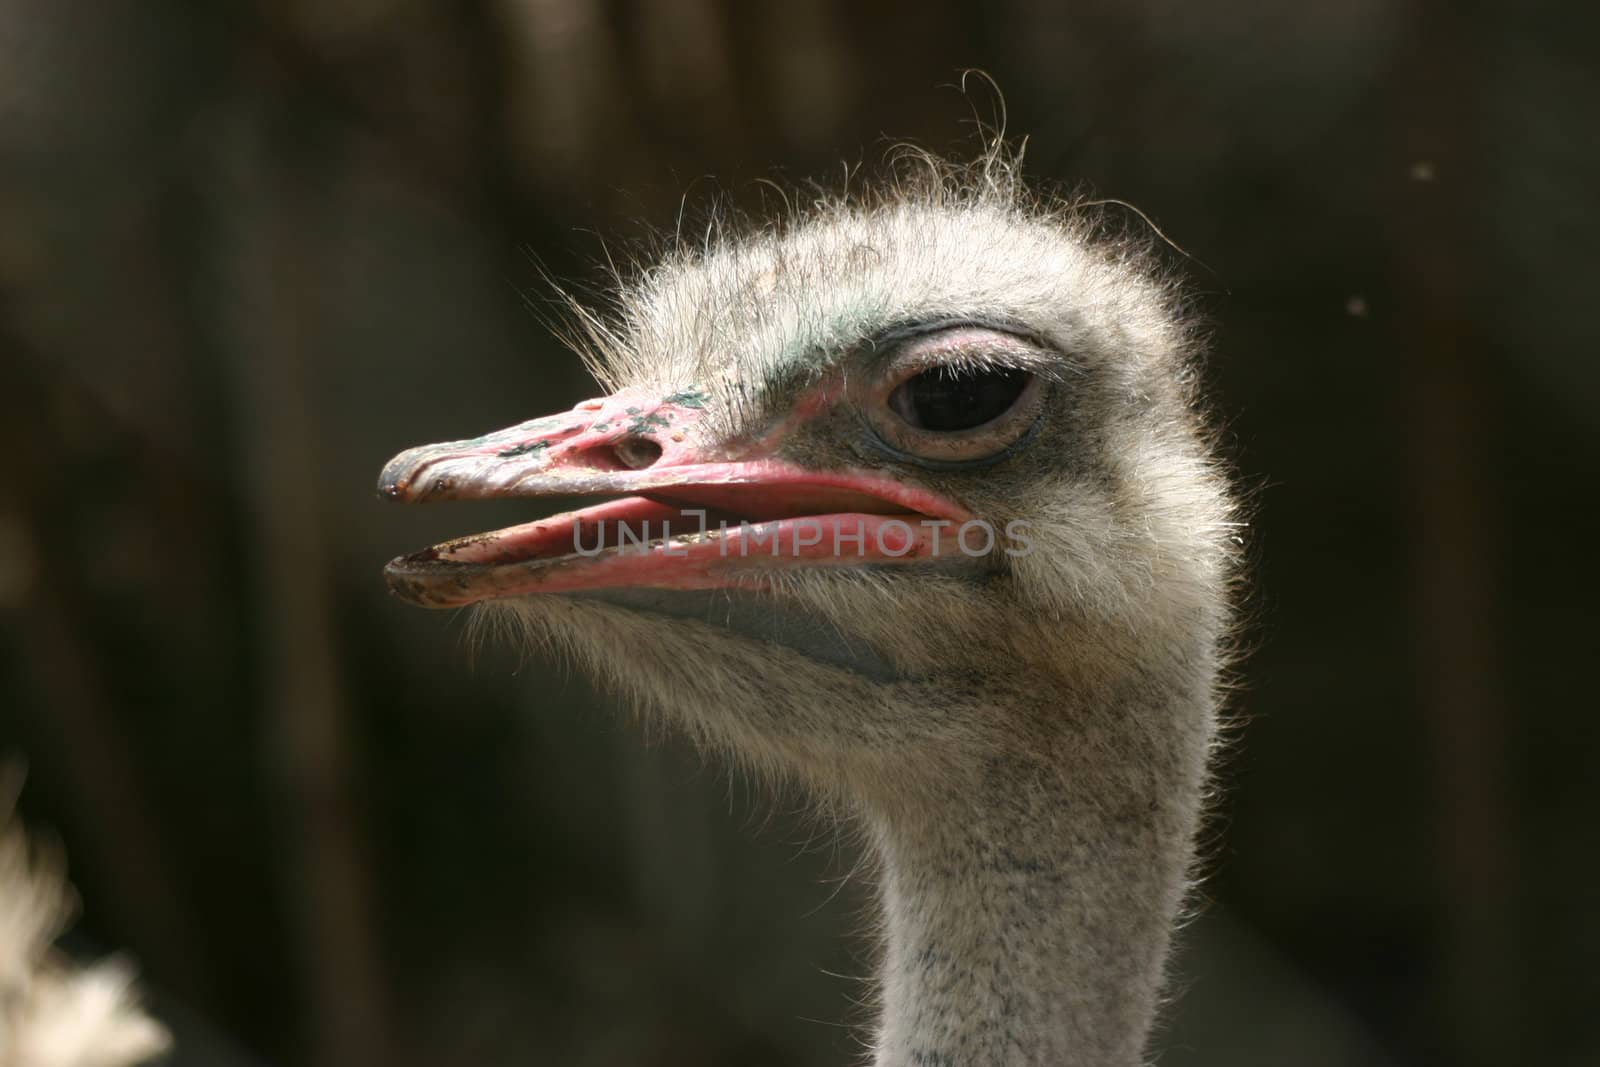 Side profile of a sunlit ostrich's head, sort of isolated against a dark out-of-focus background.
